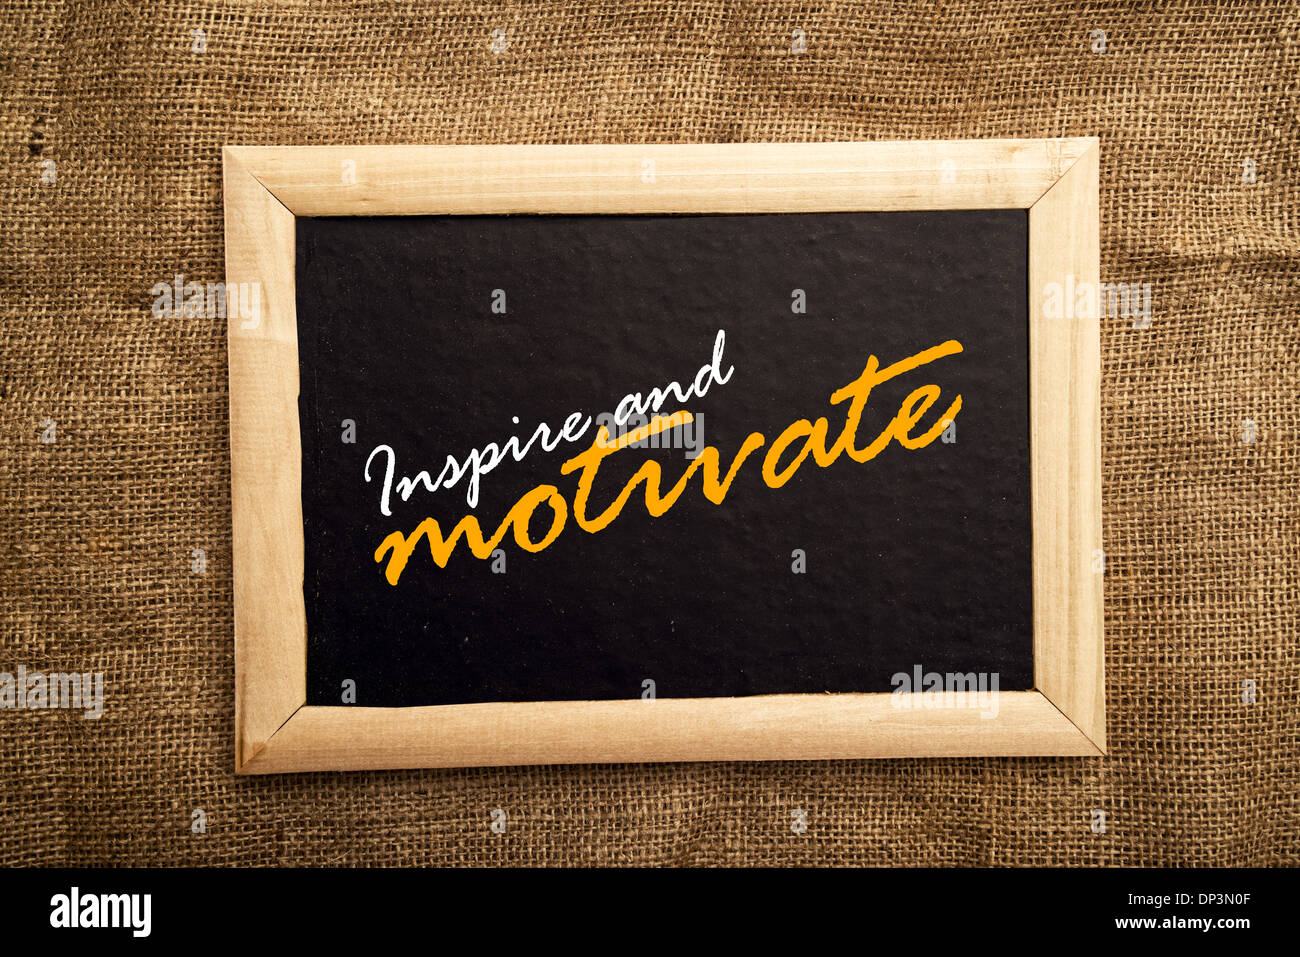 Inspire and motivate message on blackboard. Stock Photo